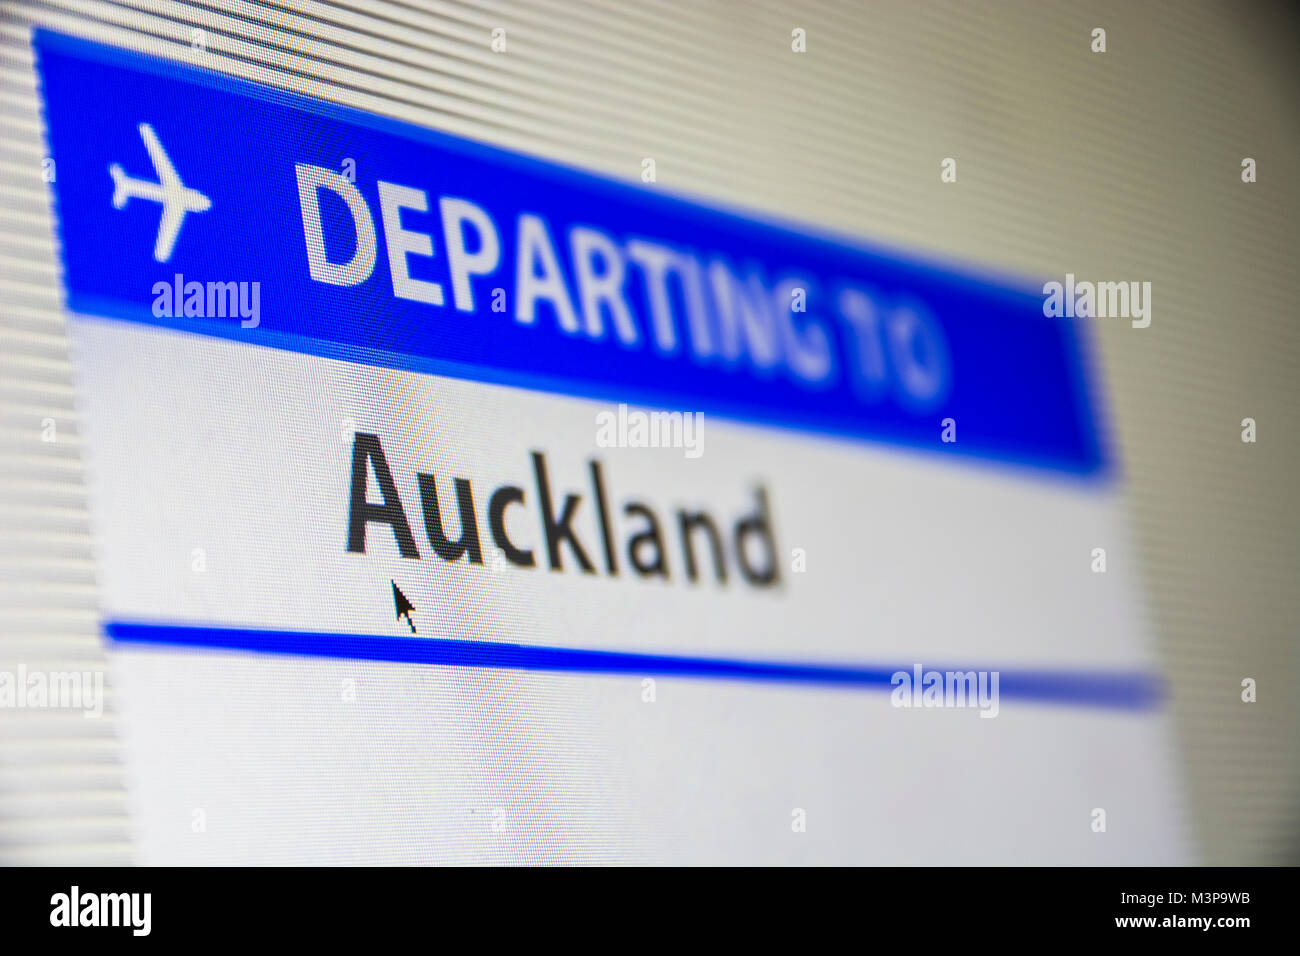 Computer screen close-up of status of flight departing to Auckland, New Zealand Stock Photo